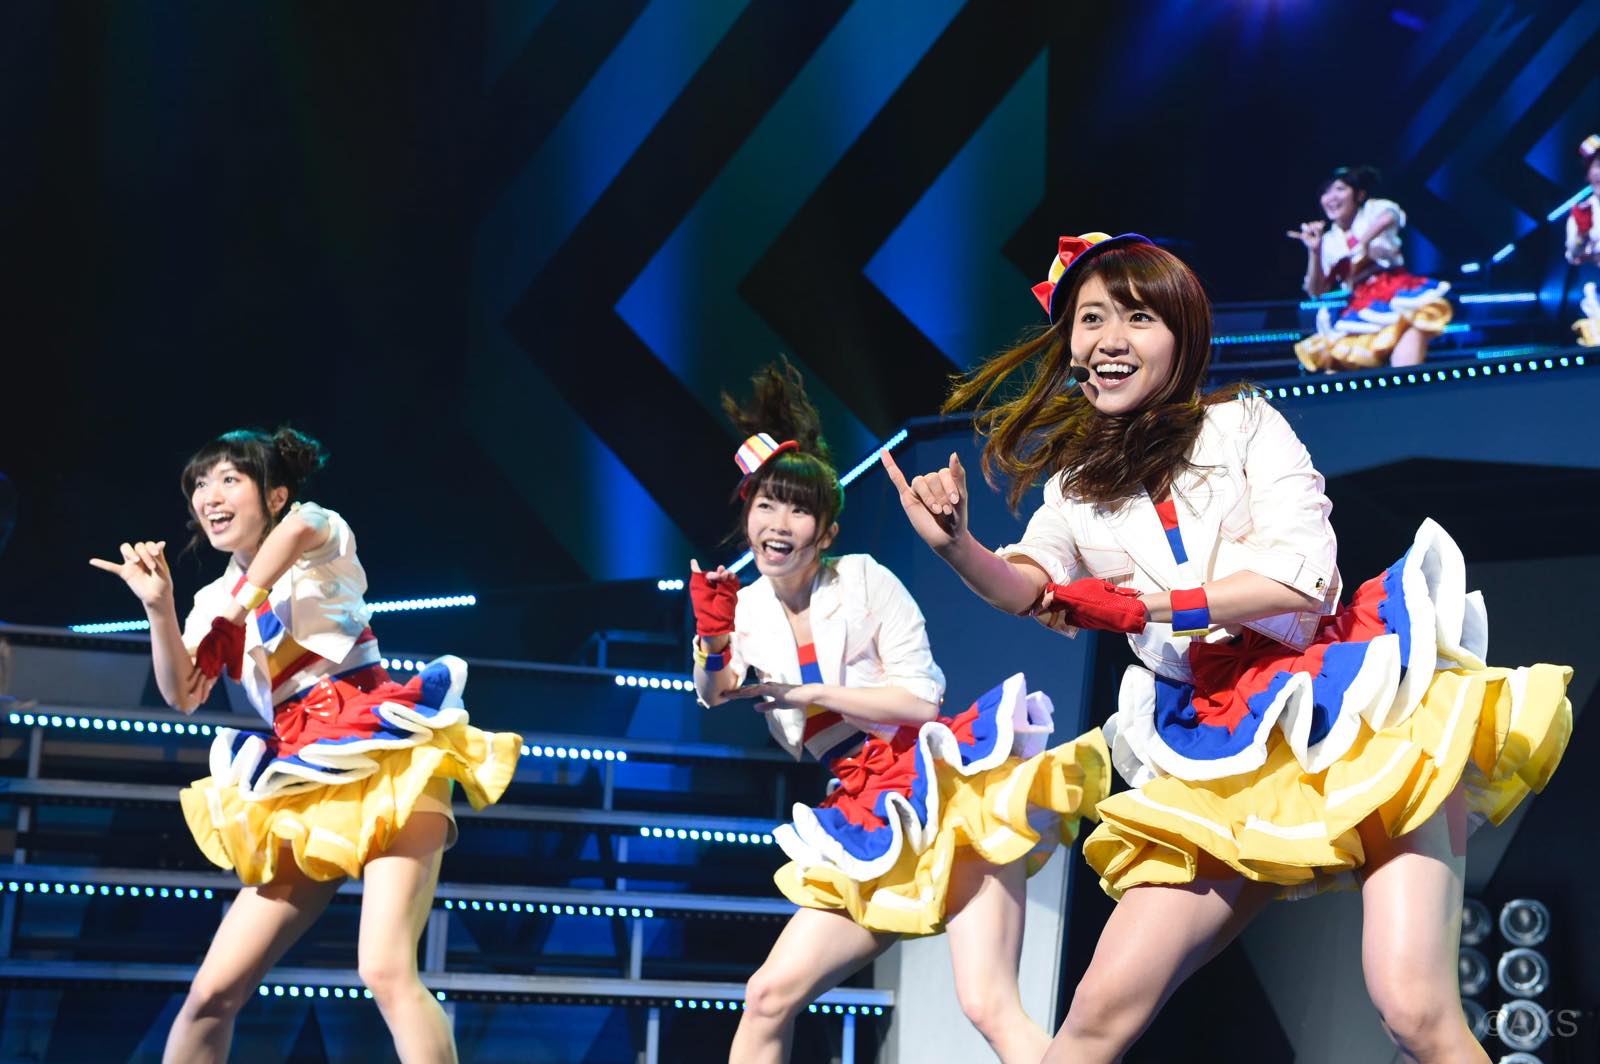 It’s “Not yet” the Weekend but Yuko Oshima Returns to Request Hour 2015!